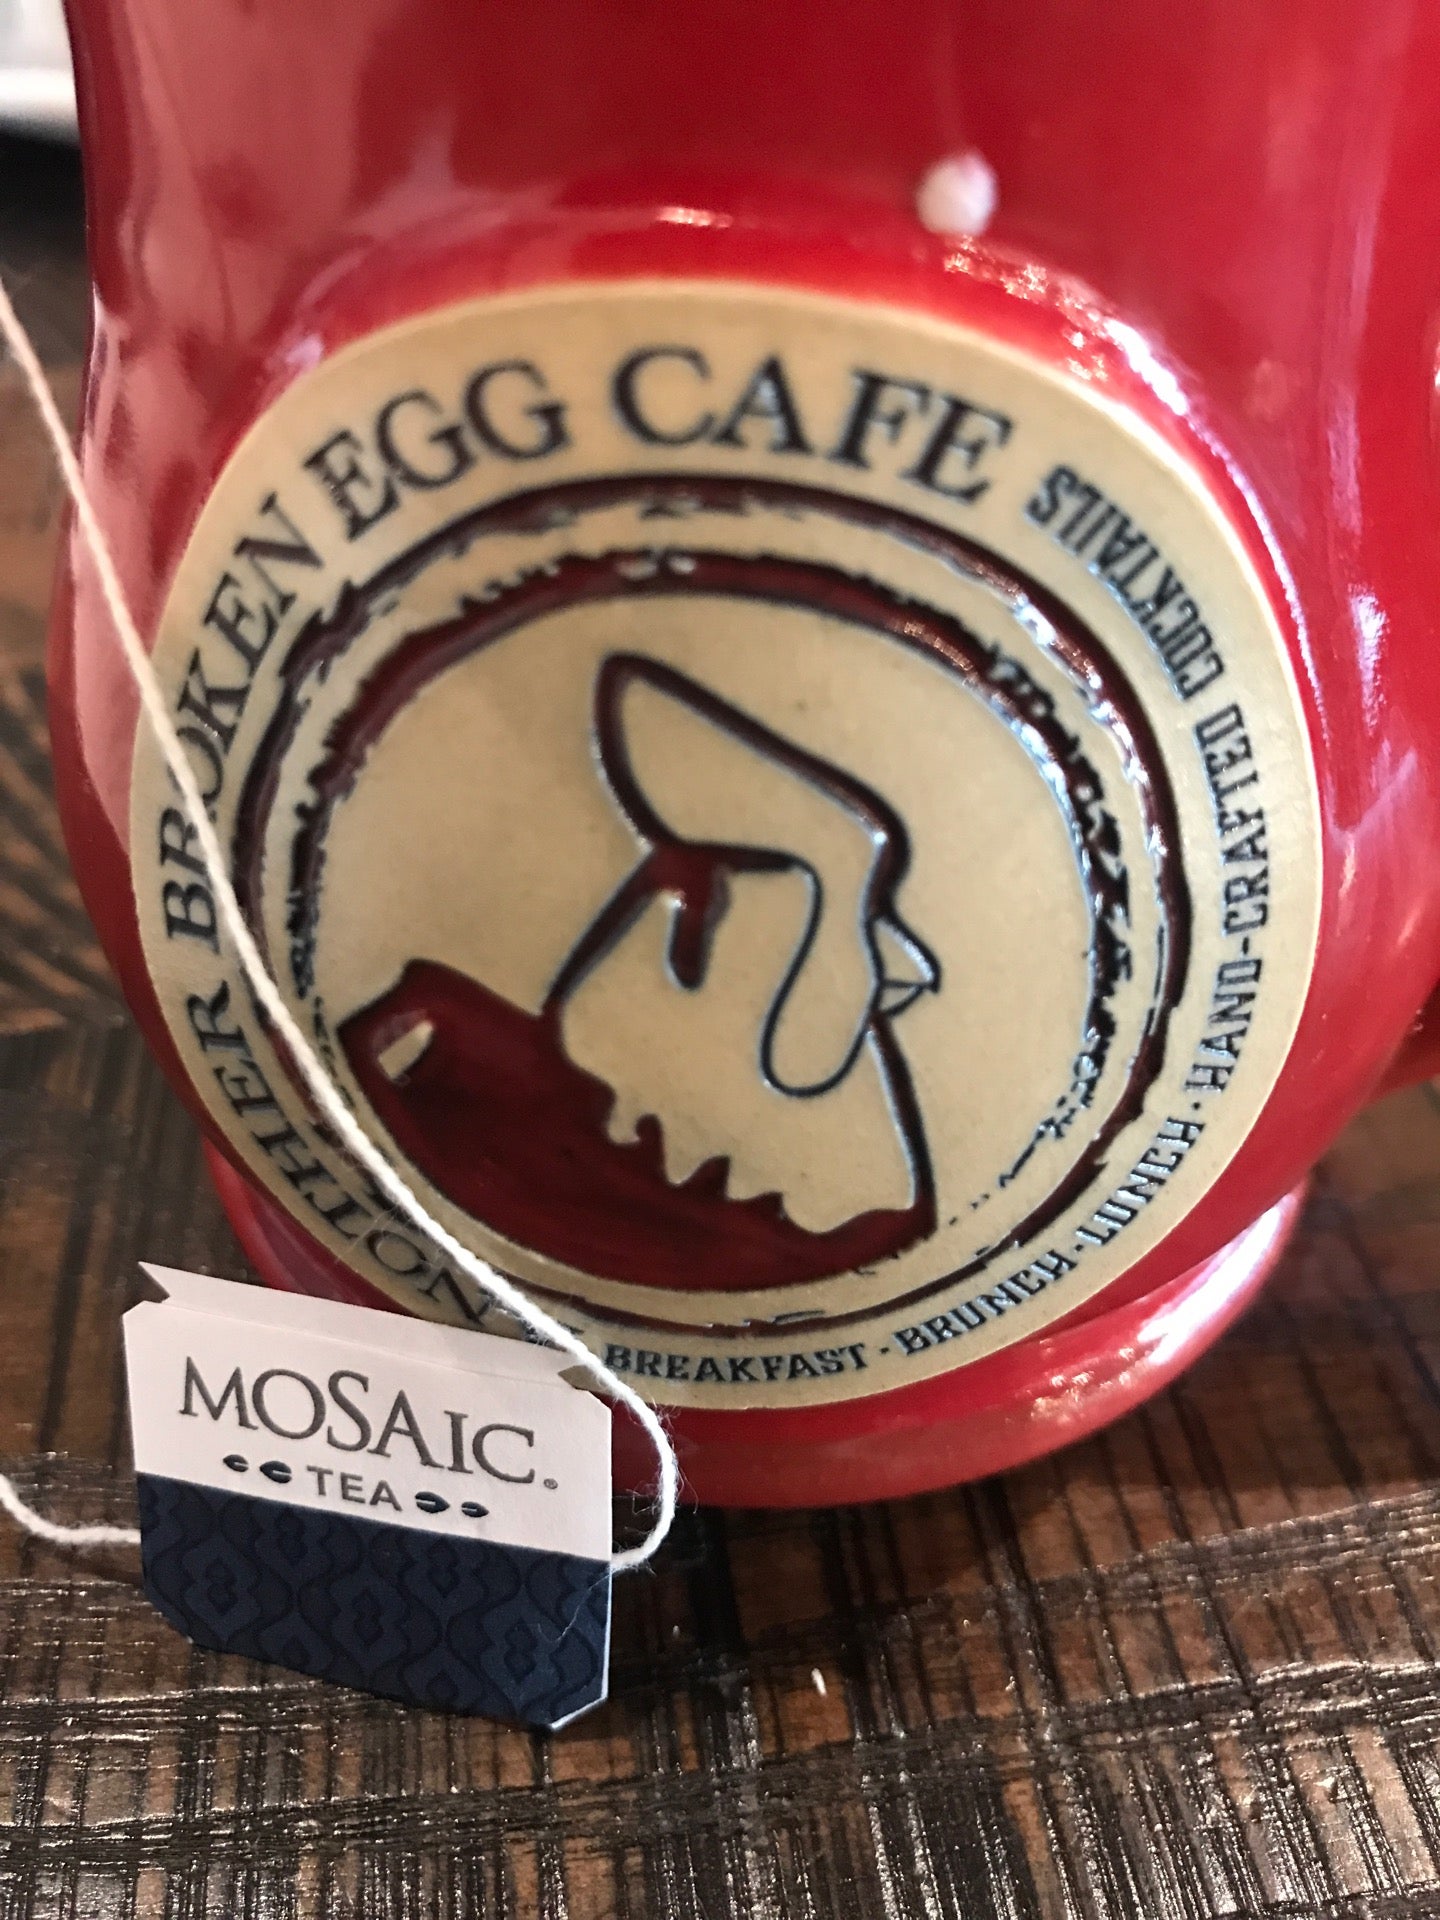 Another Broken Egg Cafe in Destin: A Review